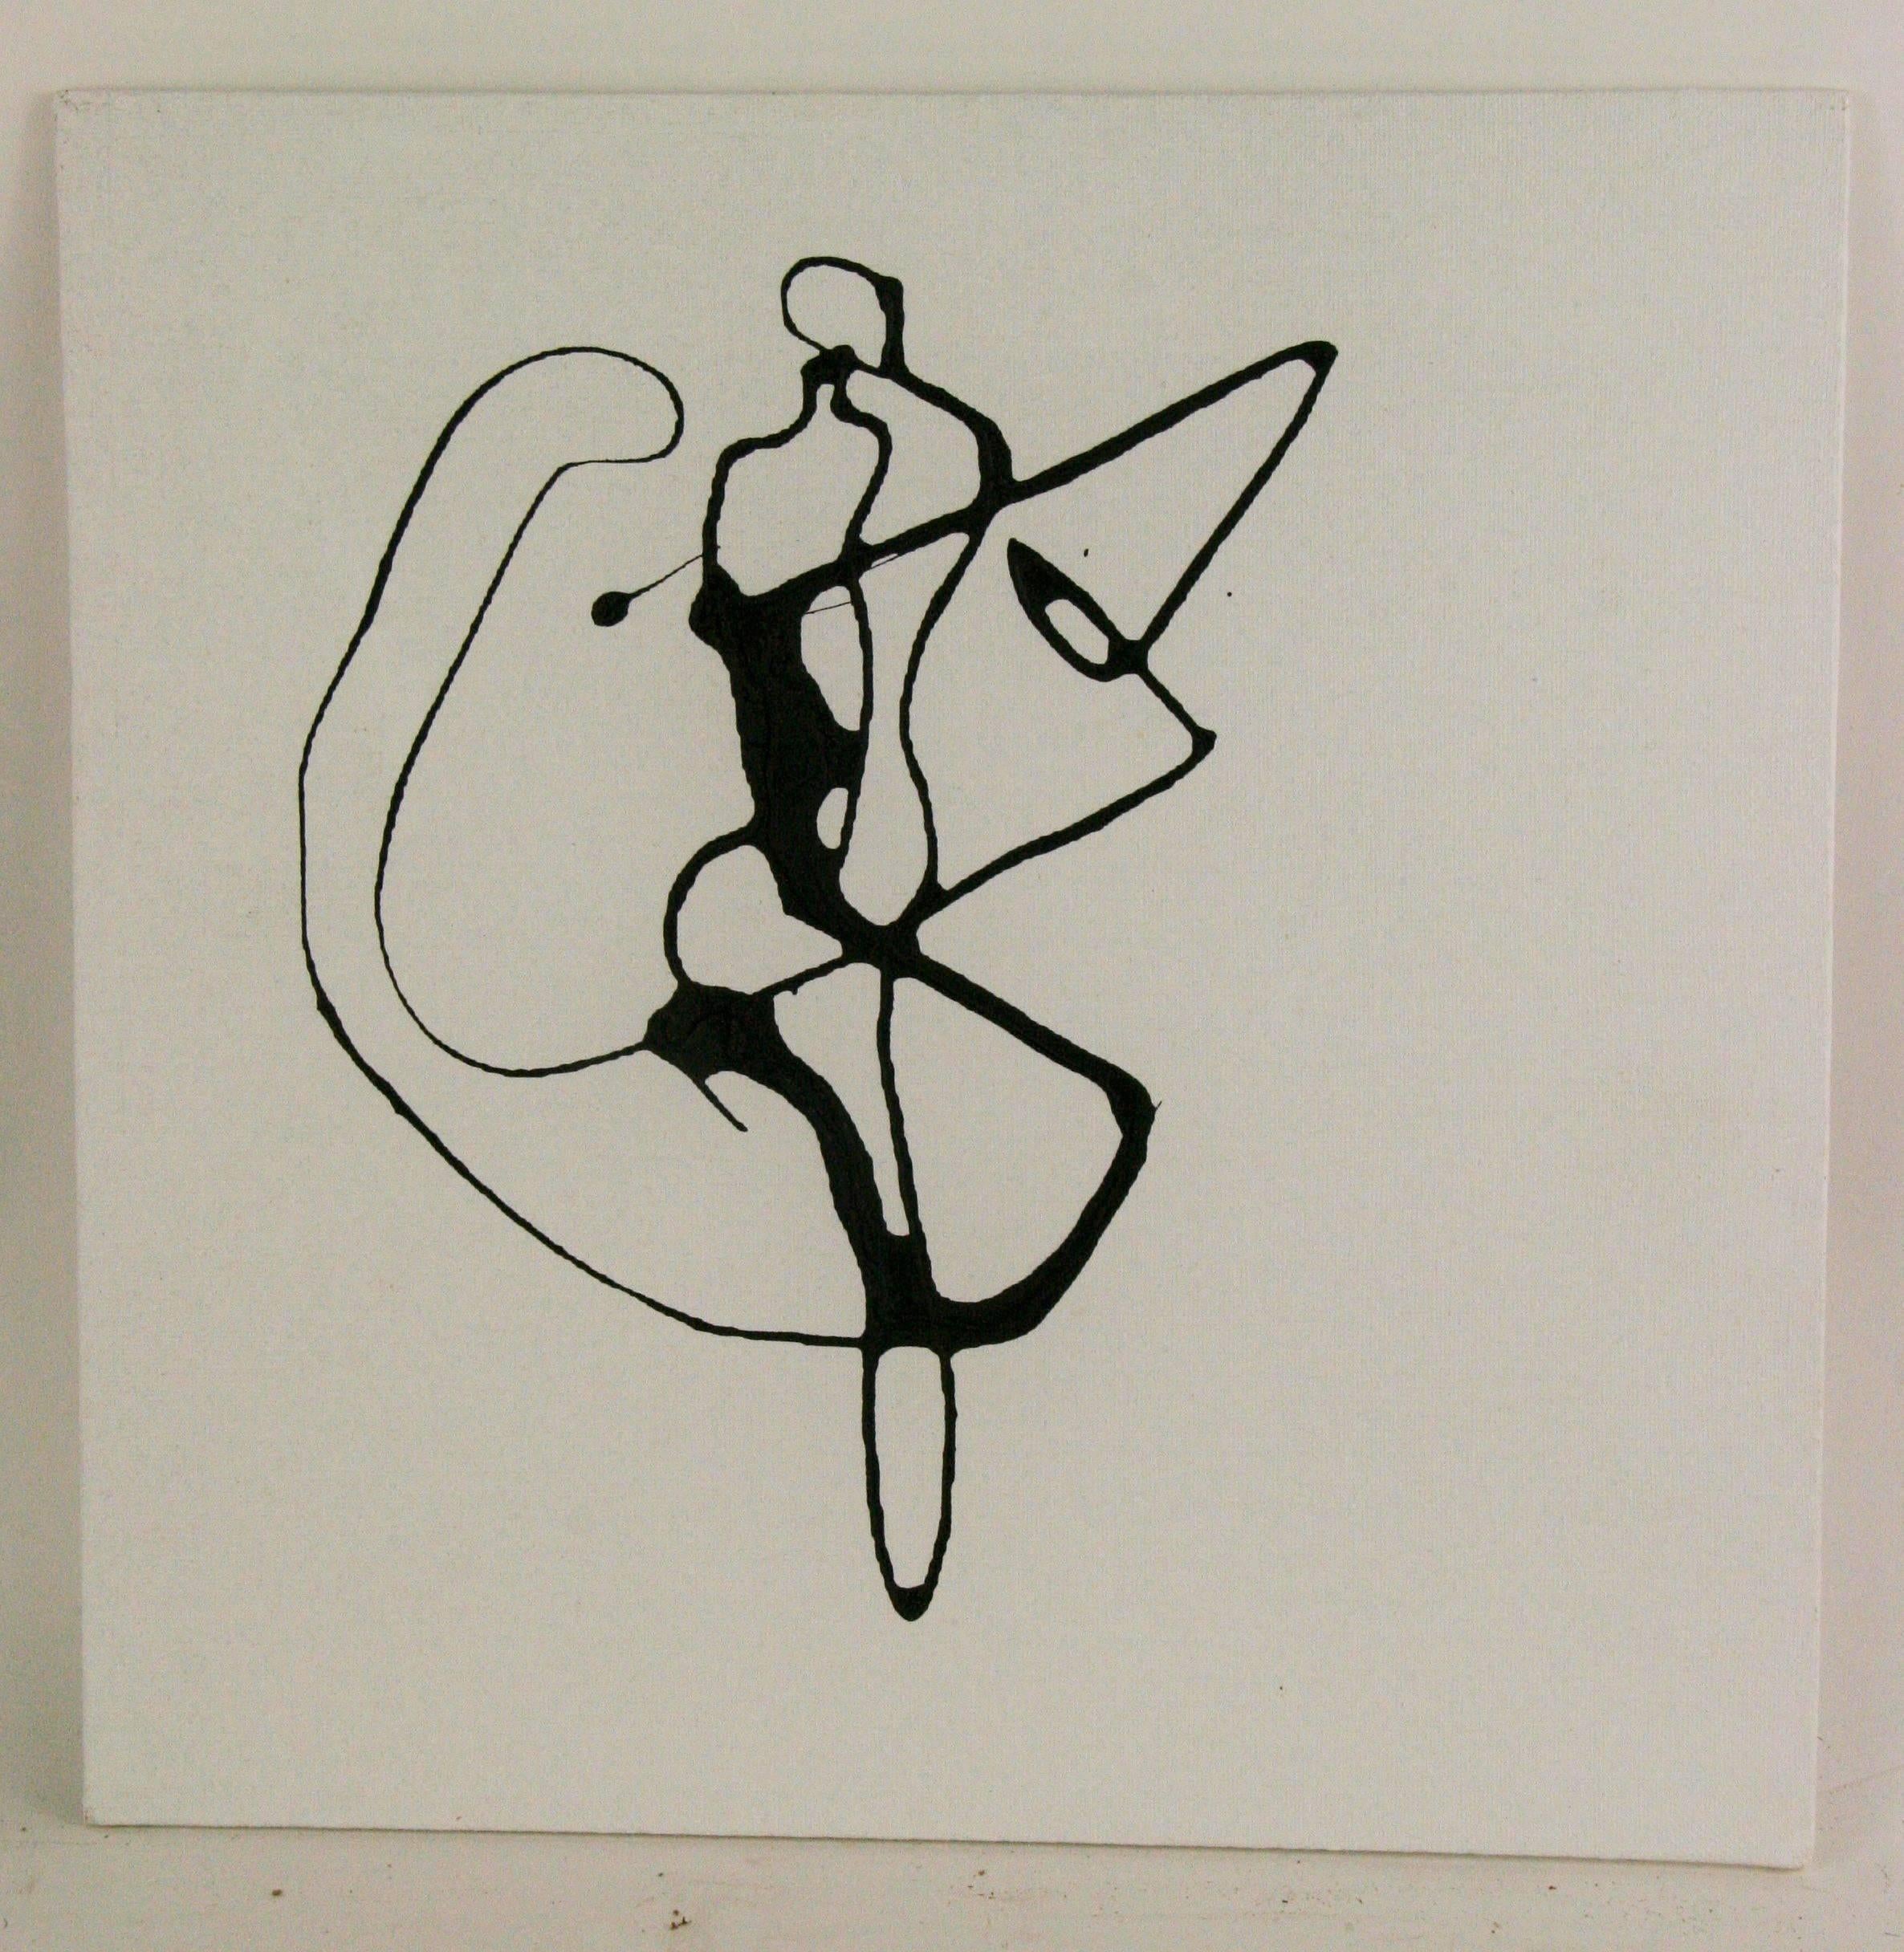 5-100 acrylic abstract dancer on artist canvas board by Jacques Simons.